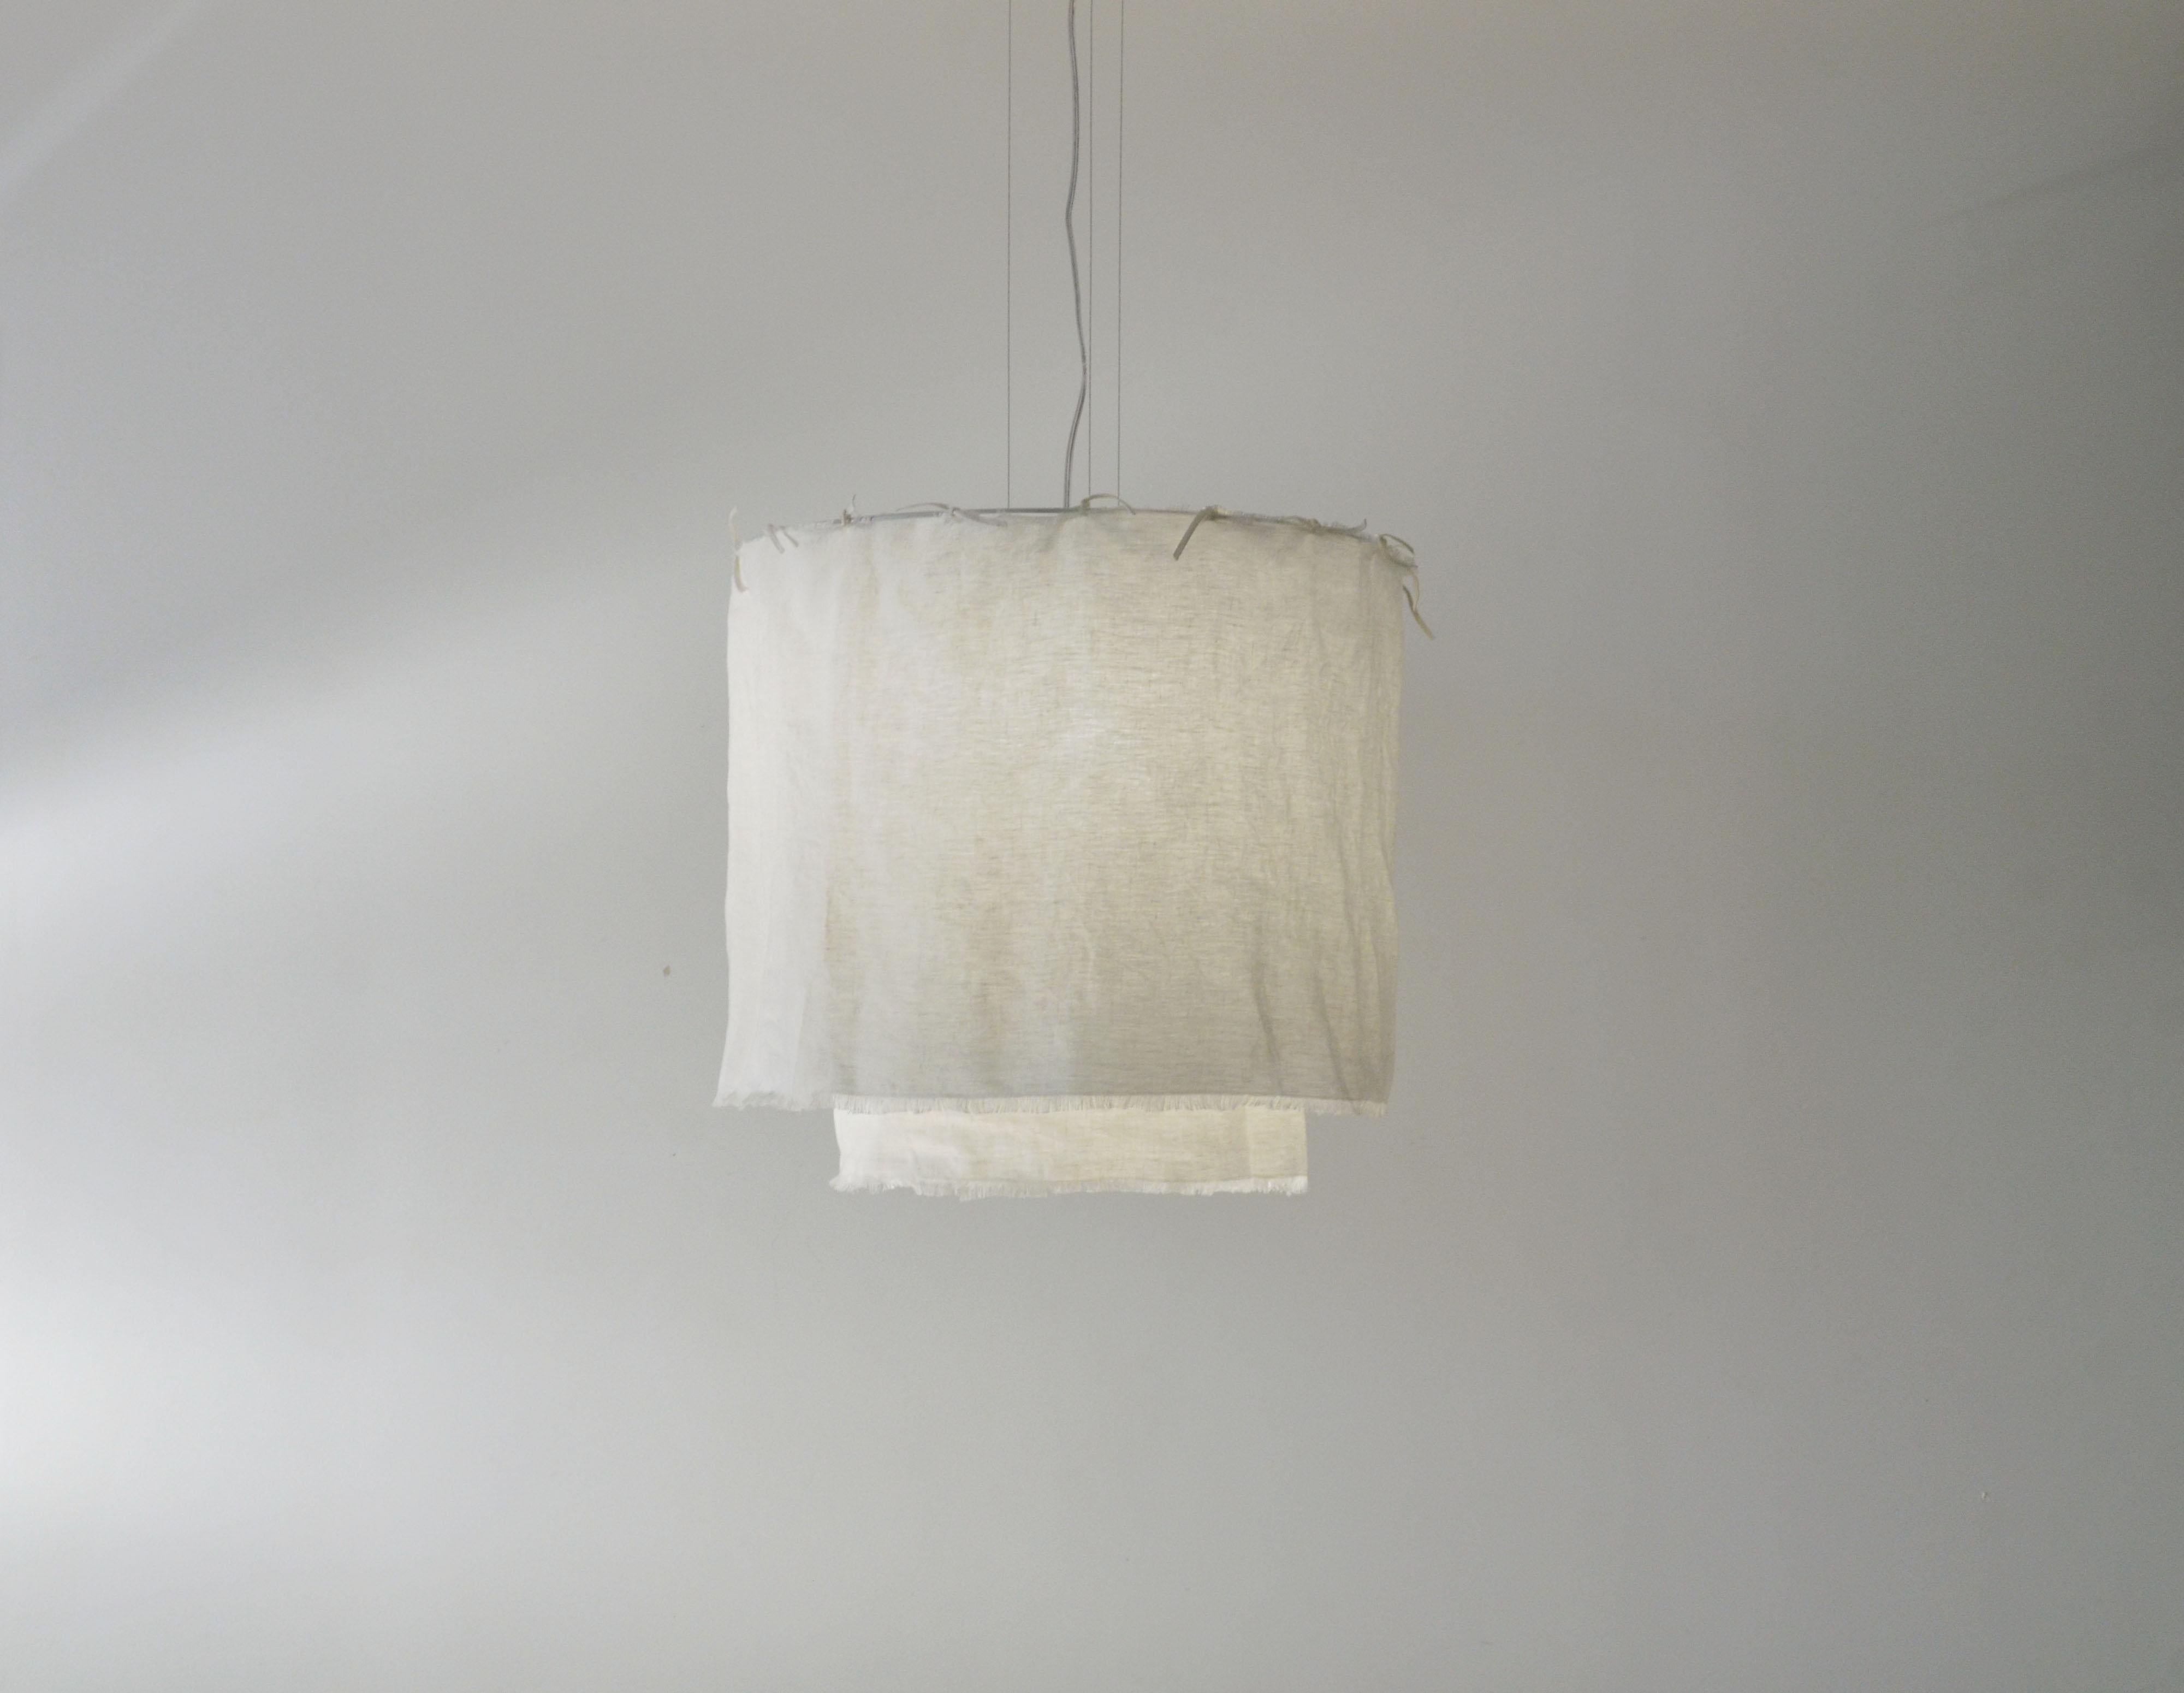 This pendant is named Acítara. 
It has two layers, one longer than the other, and it is made in prewashed white linen. The structure of the product is made of white alumnium. 
The linen can me dry cleaned, because it is prewashed. 
It has 50cm of